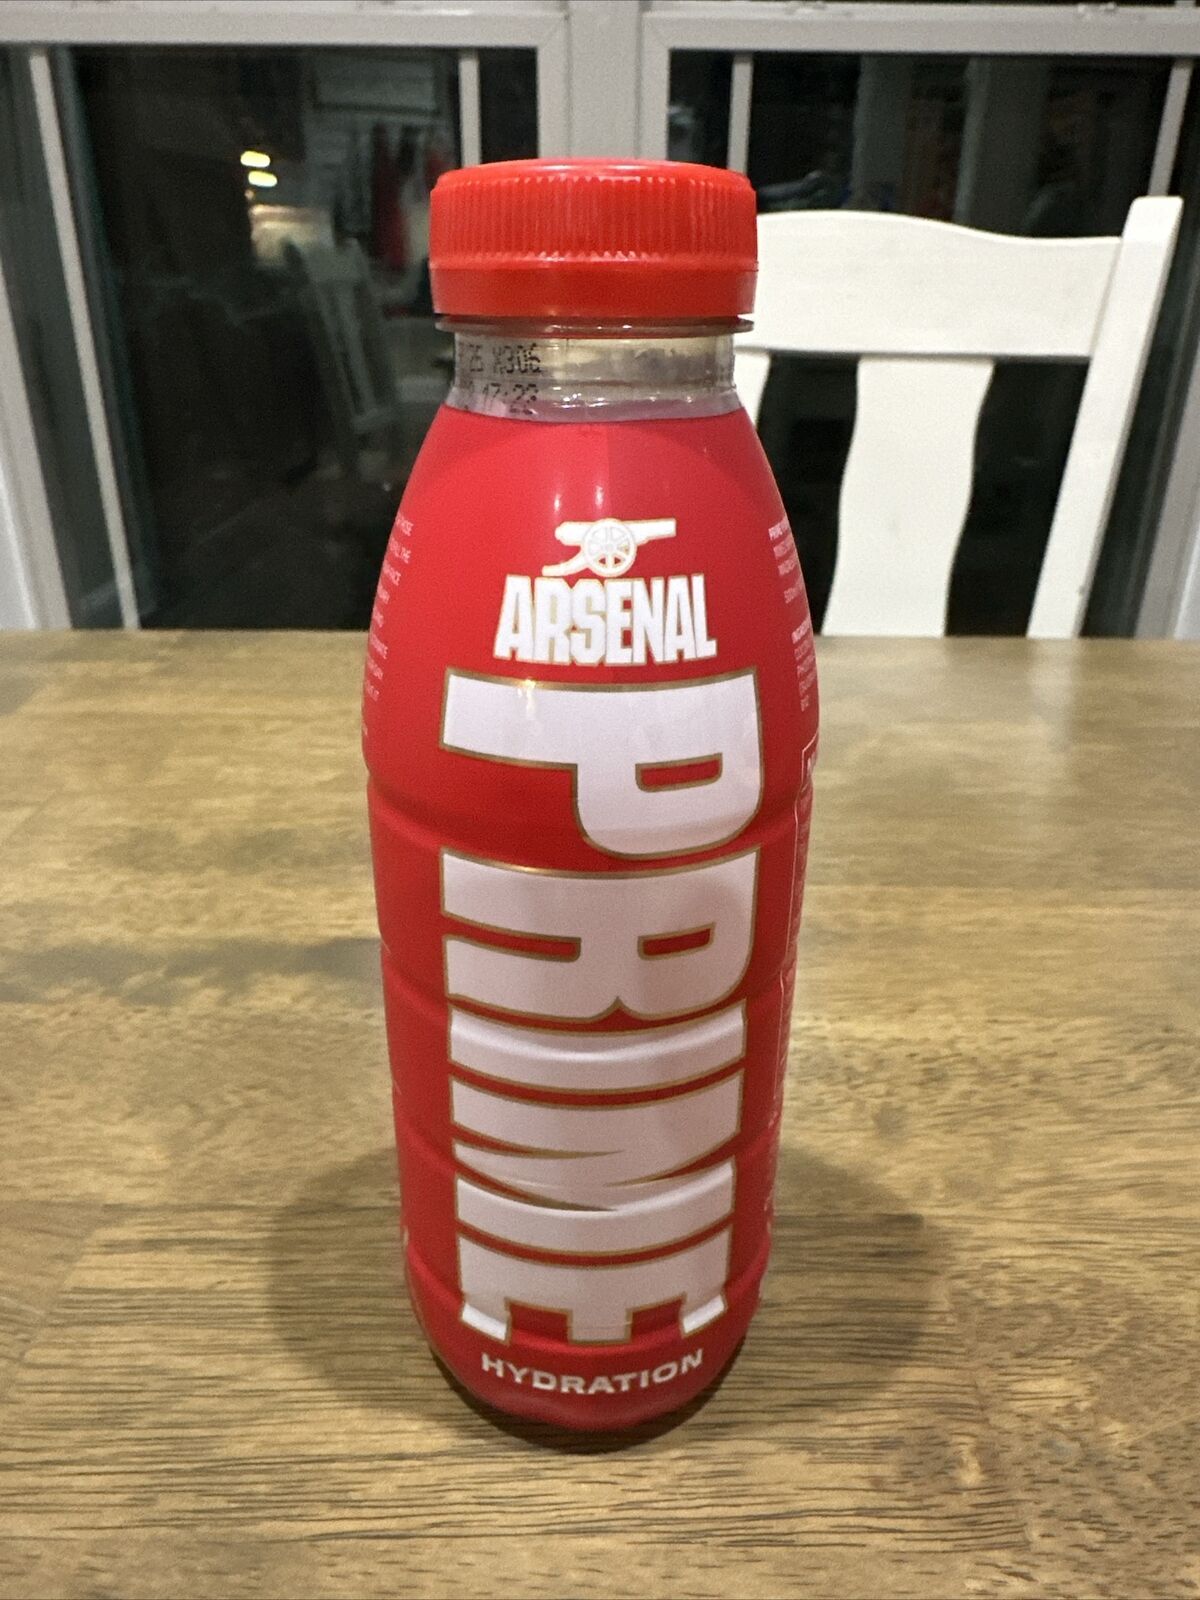 On hand New Arsenal Prime Hydration Bottle